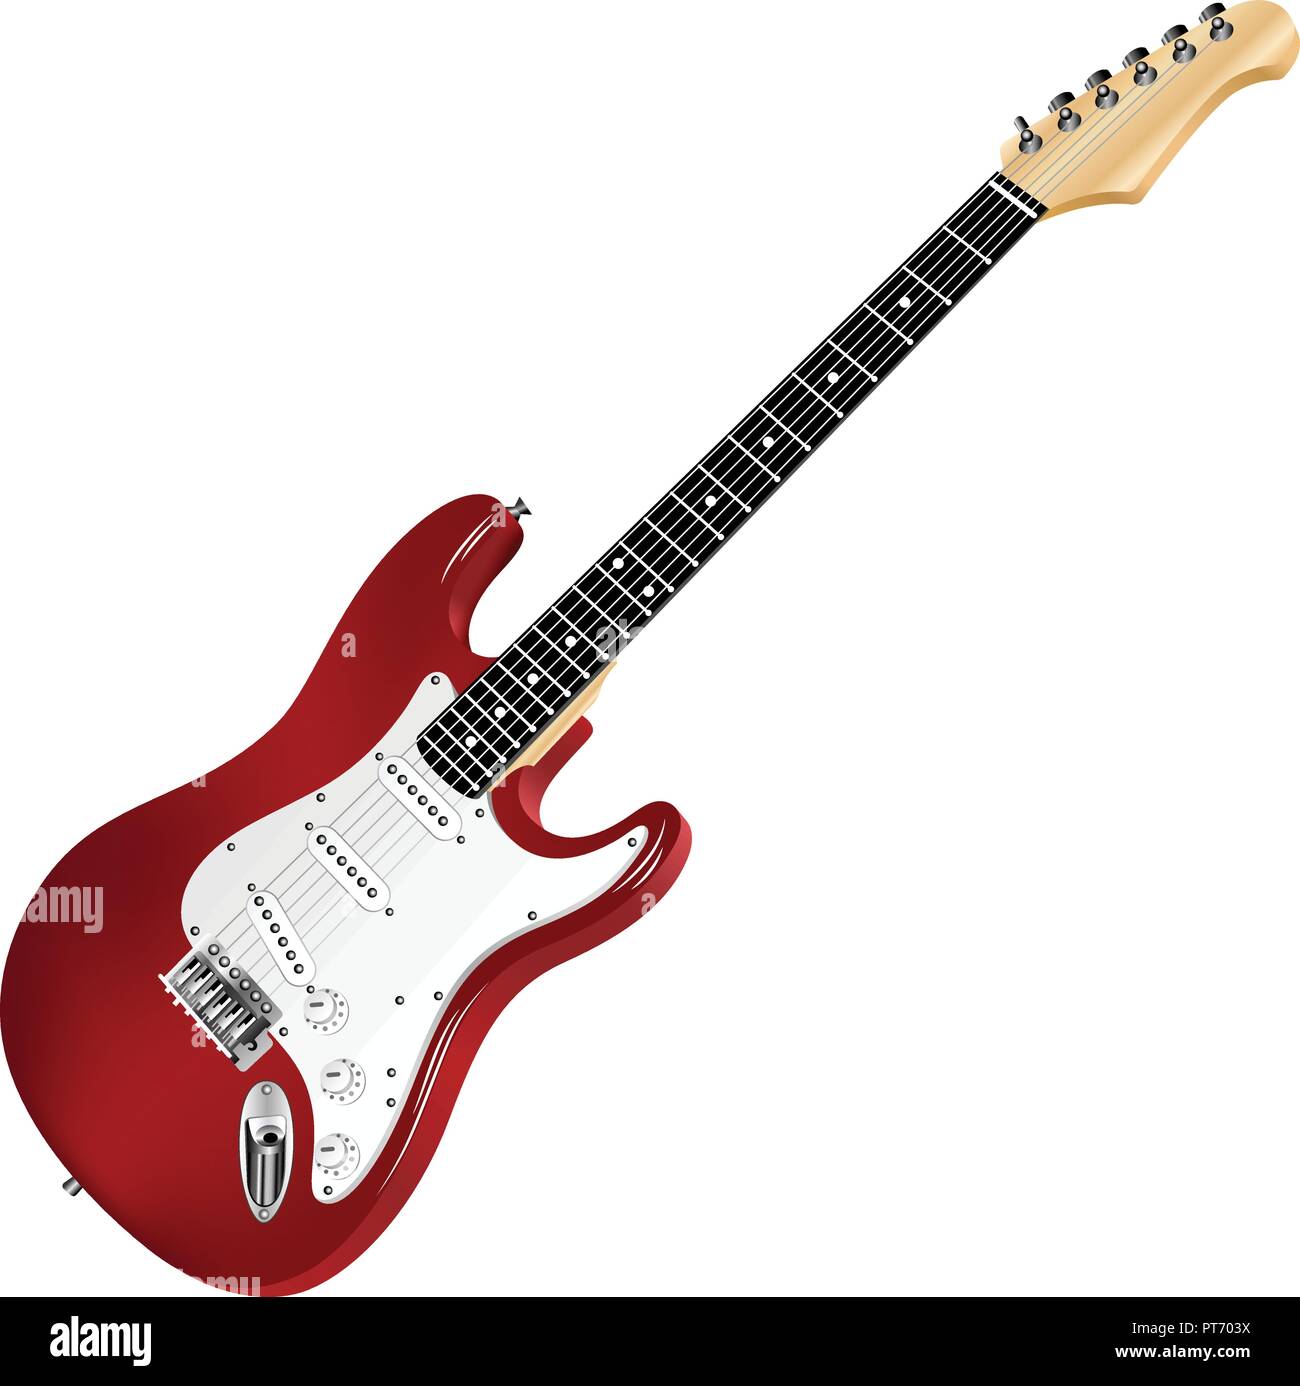 Red electric guitar, classic. Stock Vector